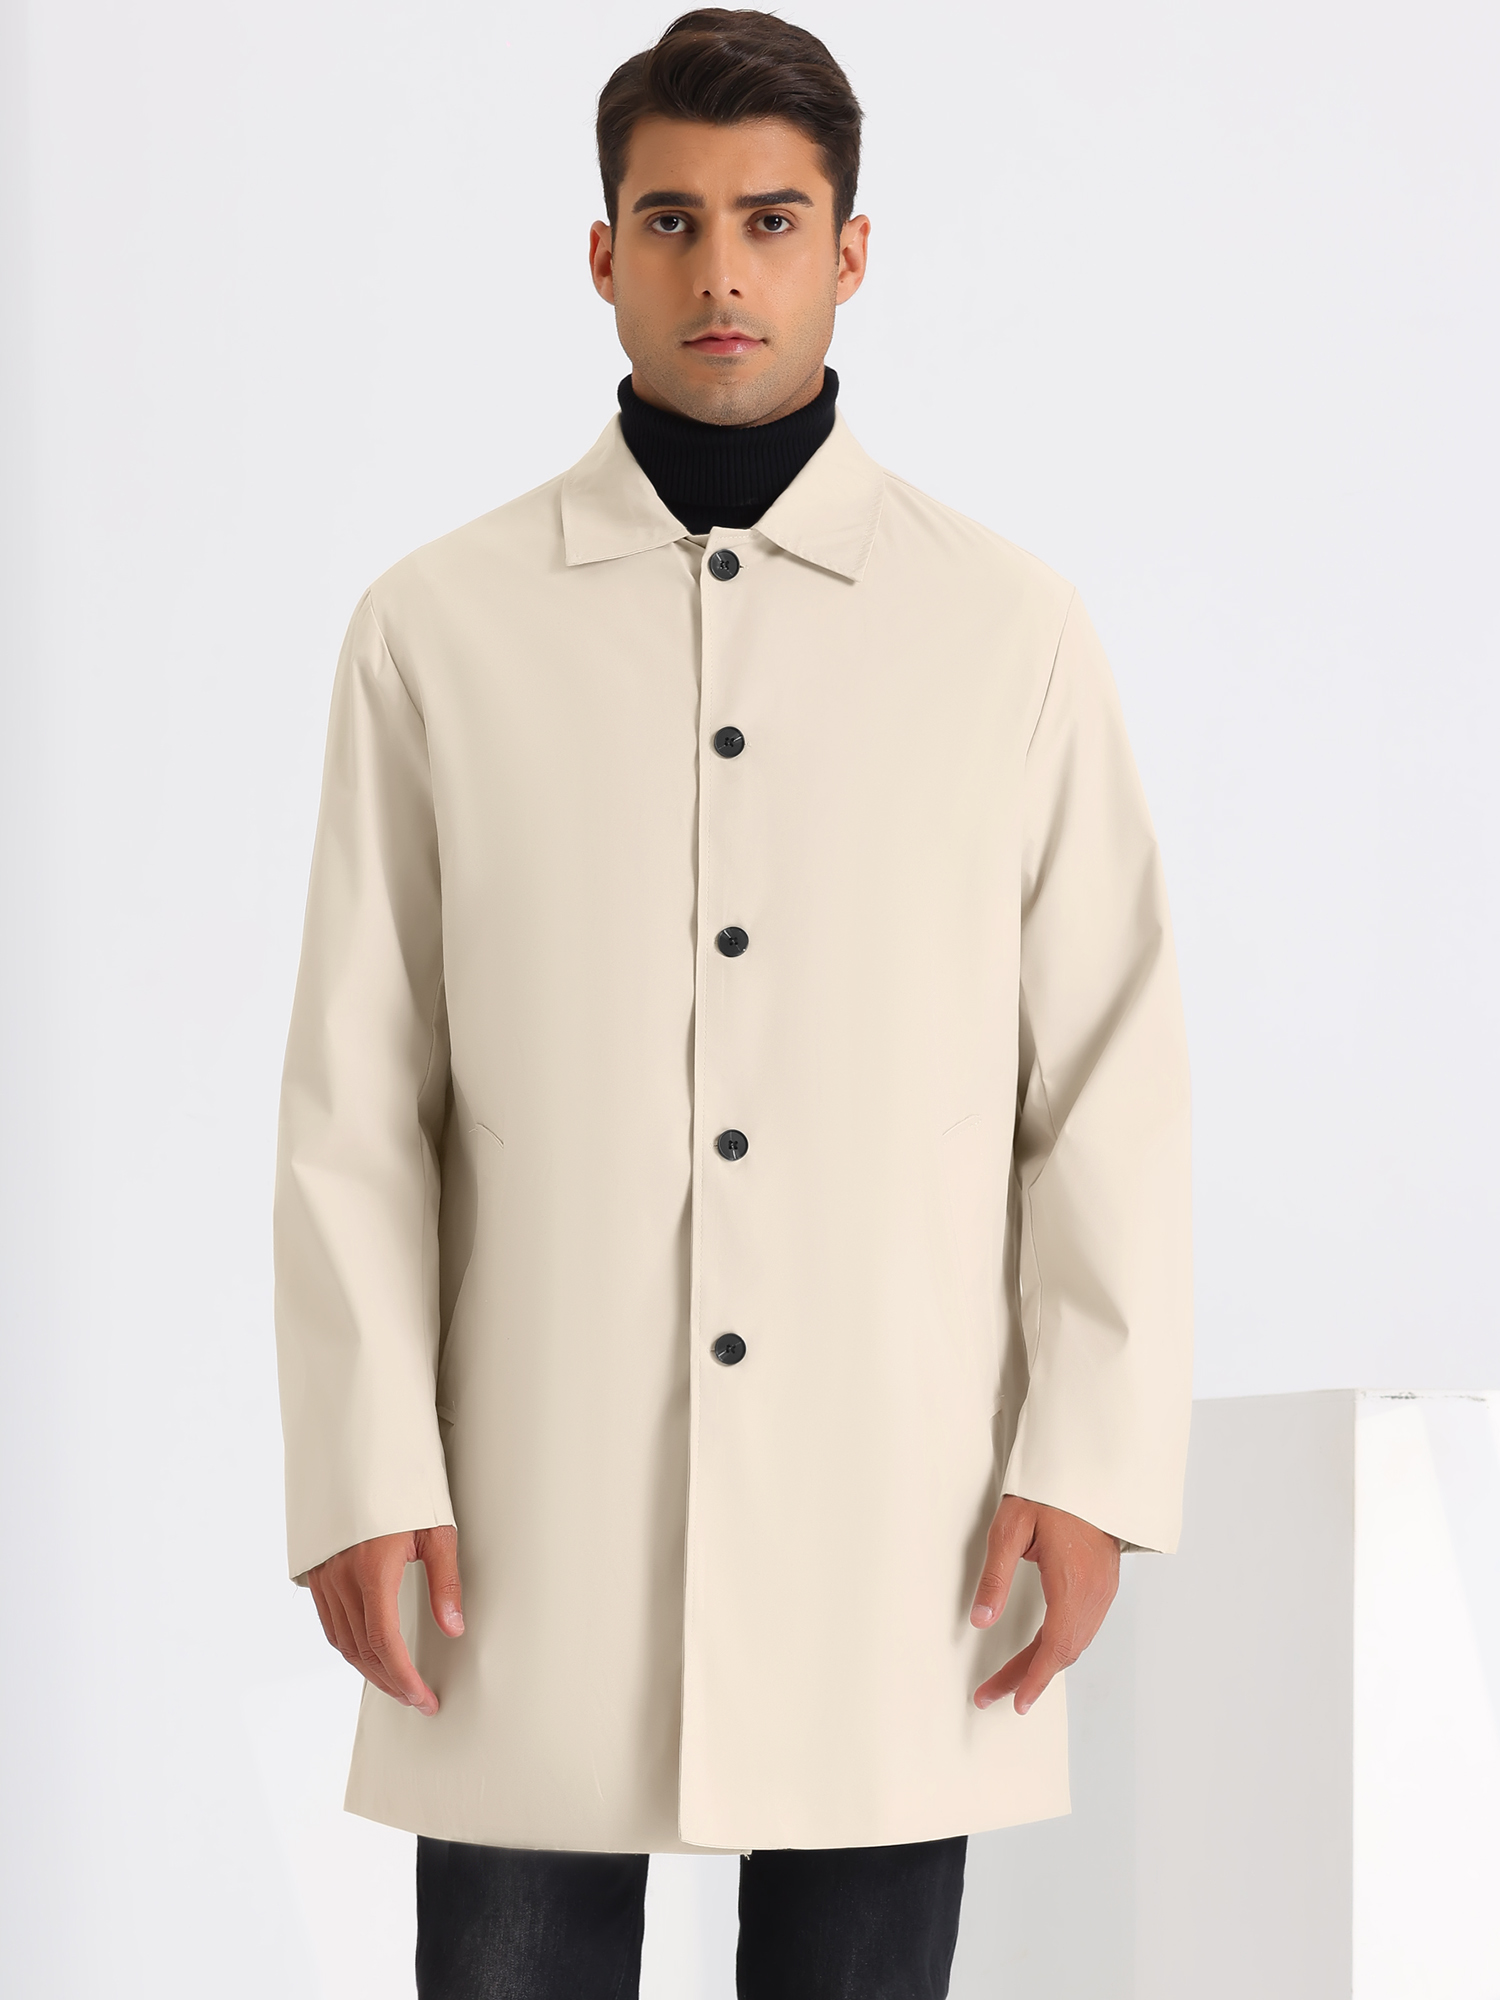 Unique Bargains Trench Coat for Men's Solid Color Collared SIngle Breasted Long Jacket